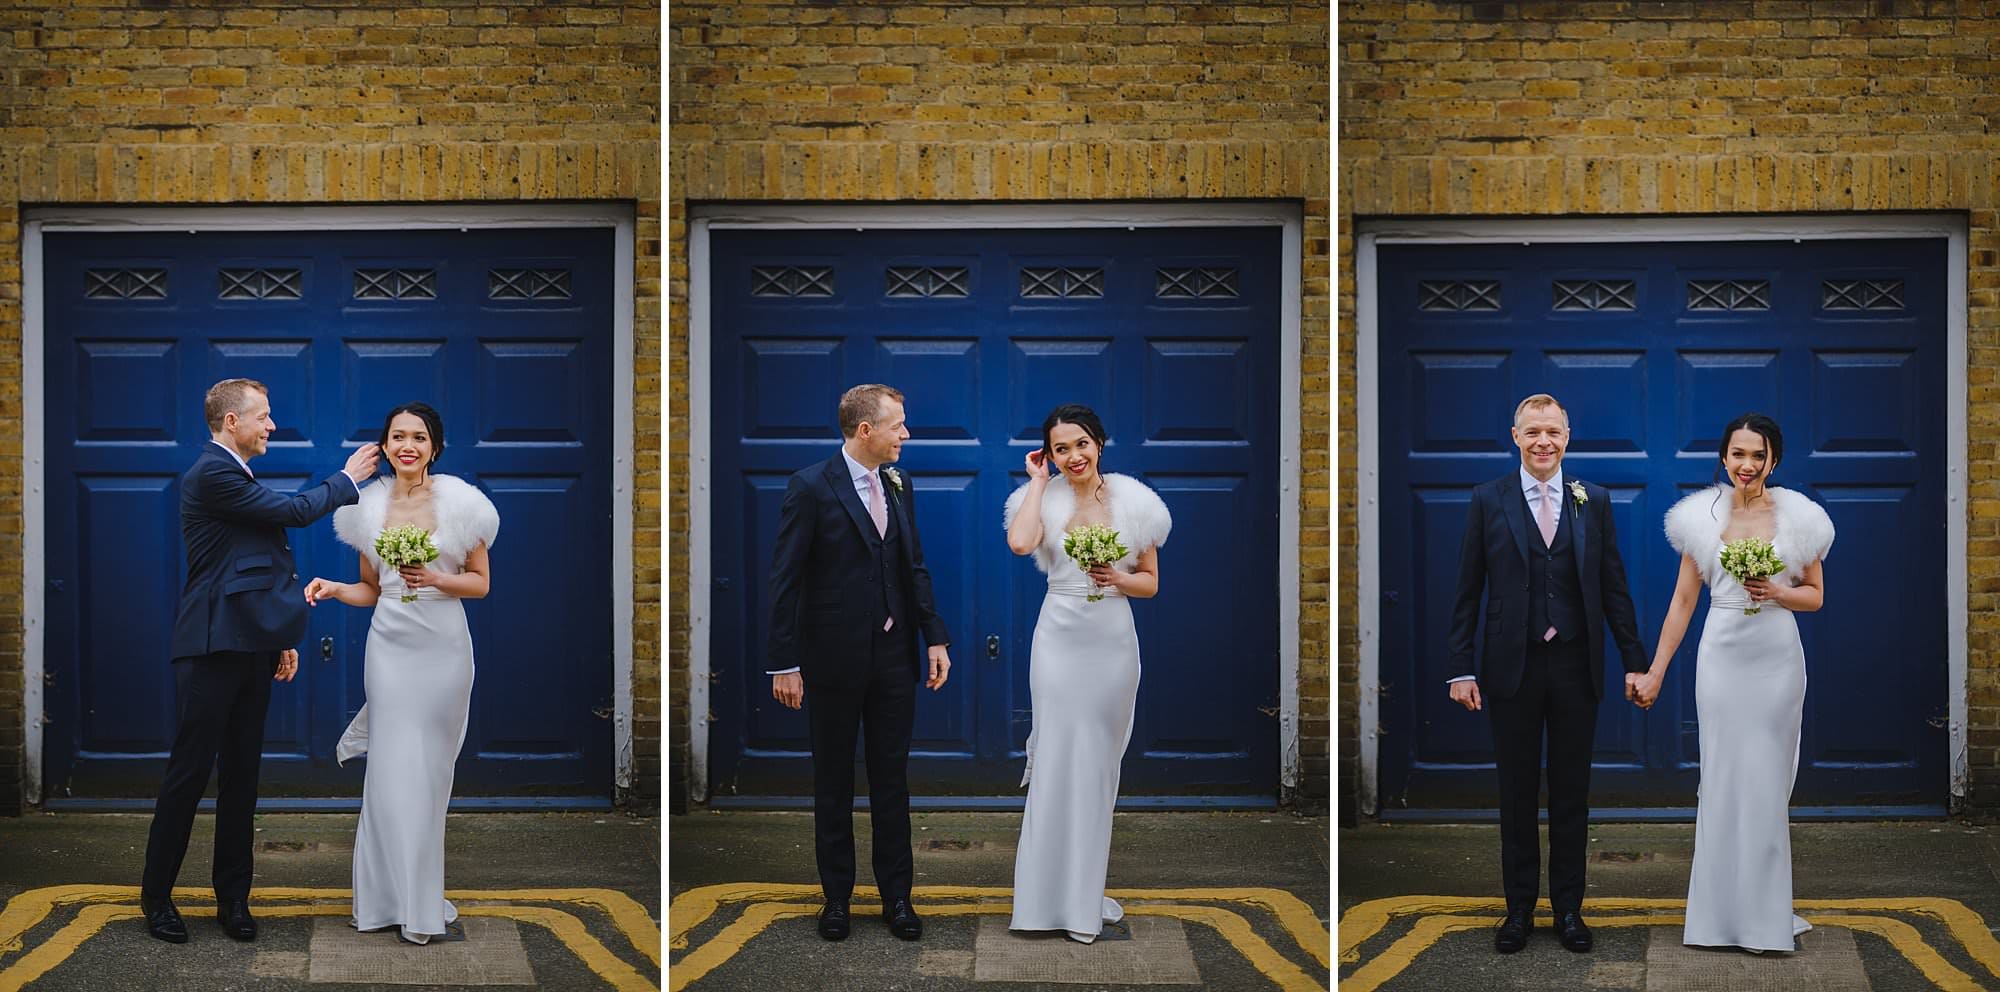 chelsea old town hall wedding photographer st 046 - Steph + Tim | Chelsea